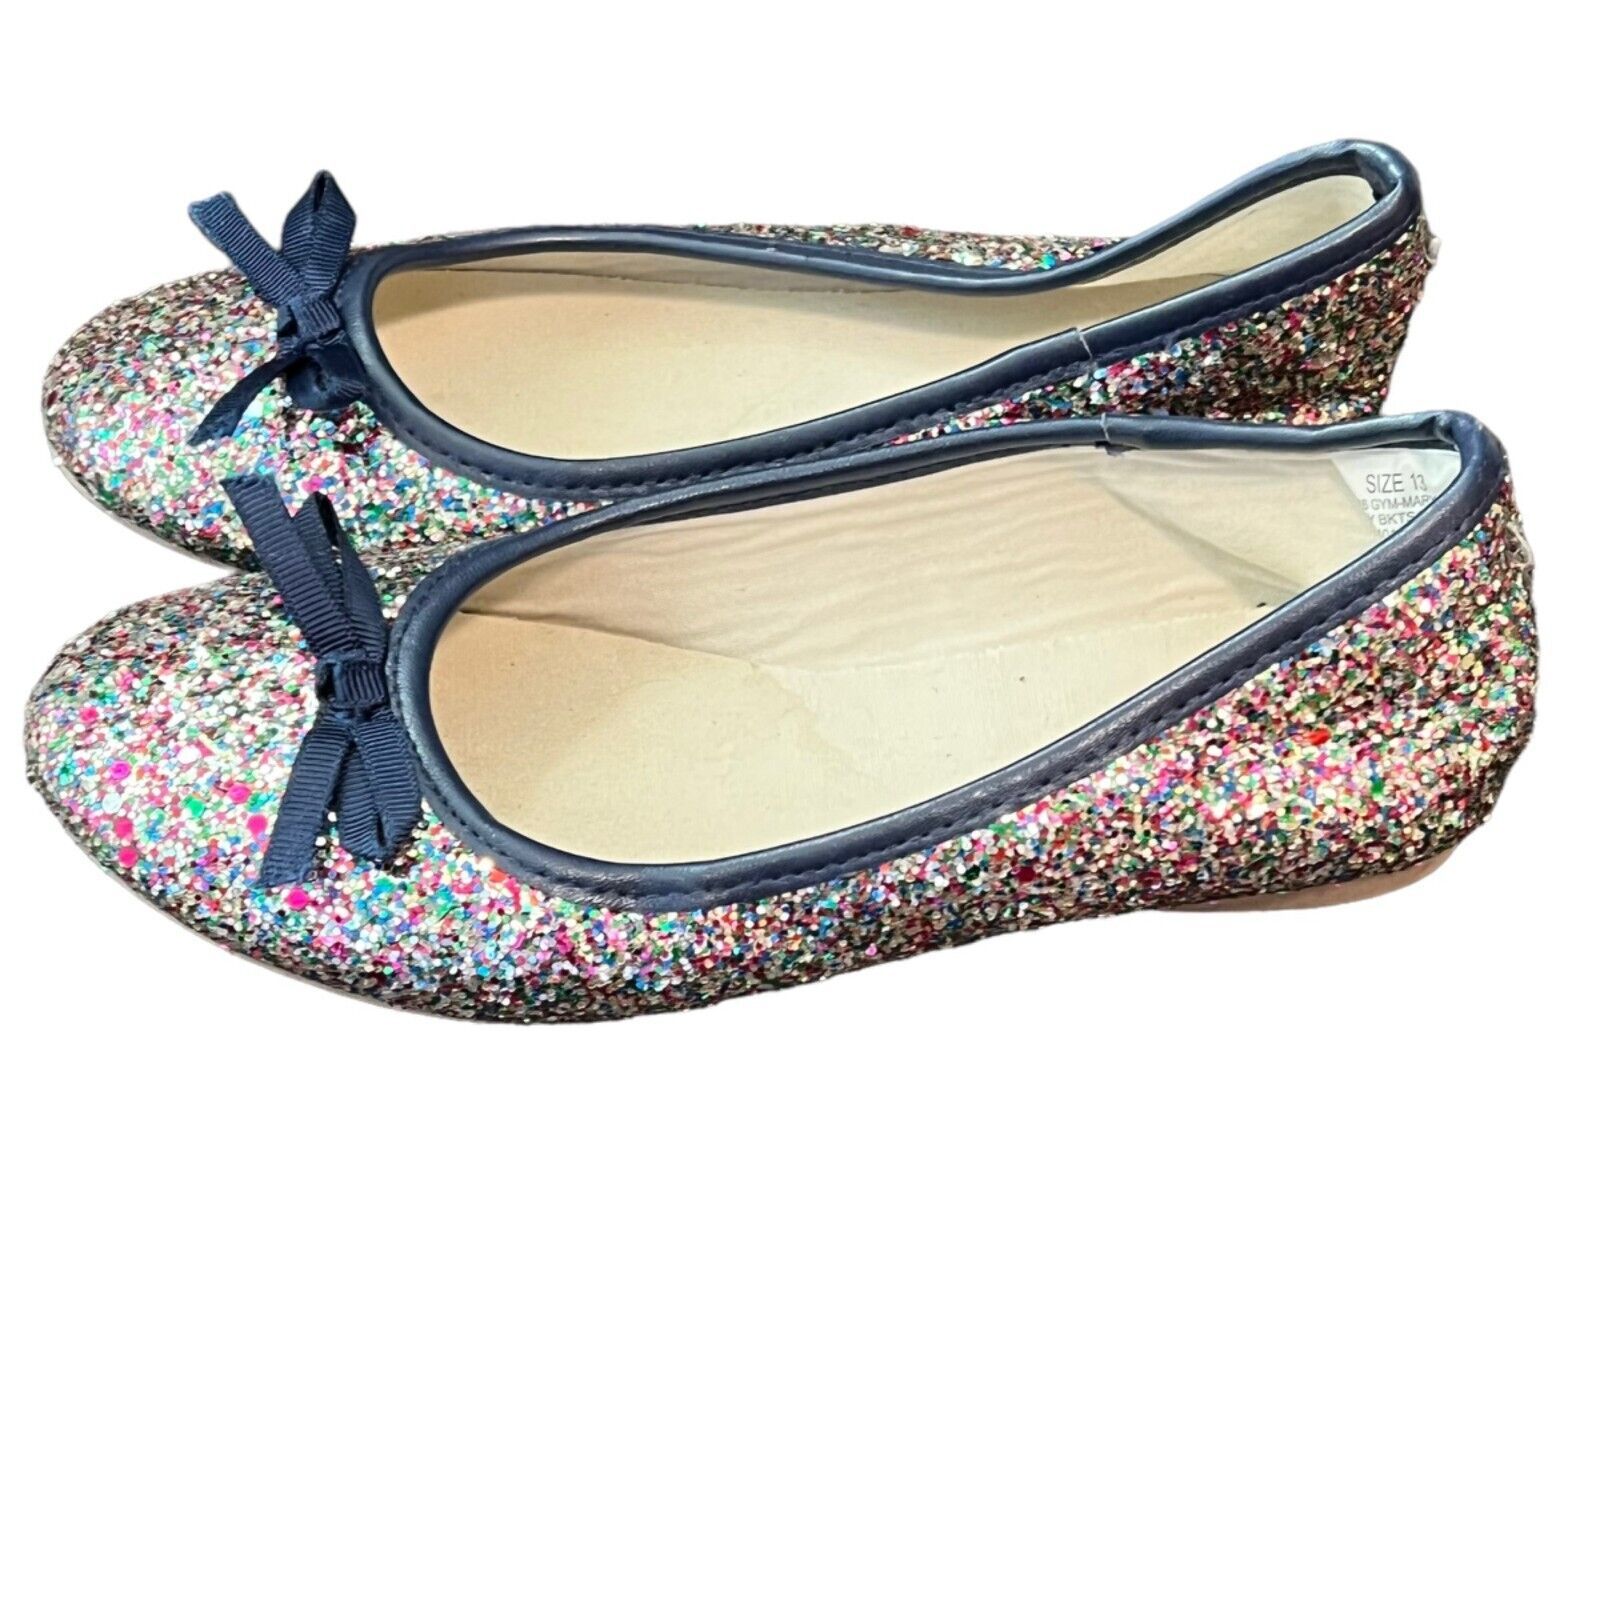 Primary image for Gymboree Ballet Flats Multi-color Sparkly Shoes Girls Sz 13